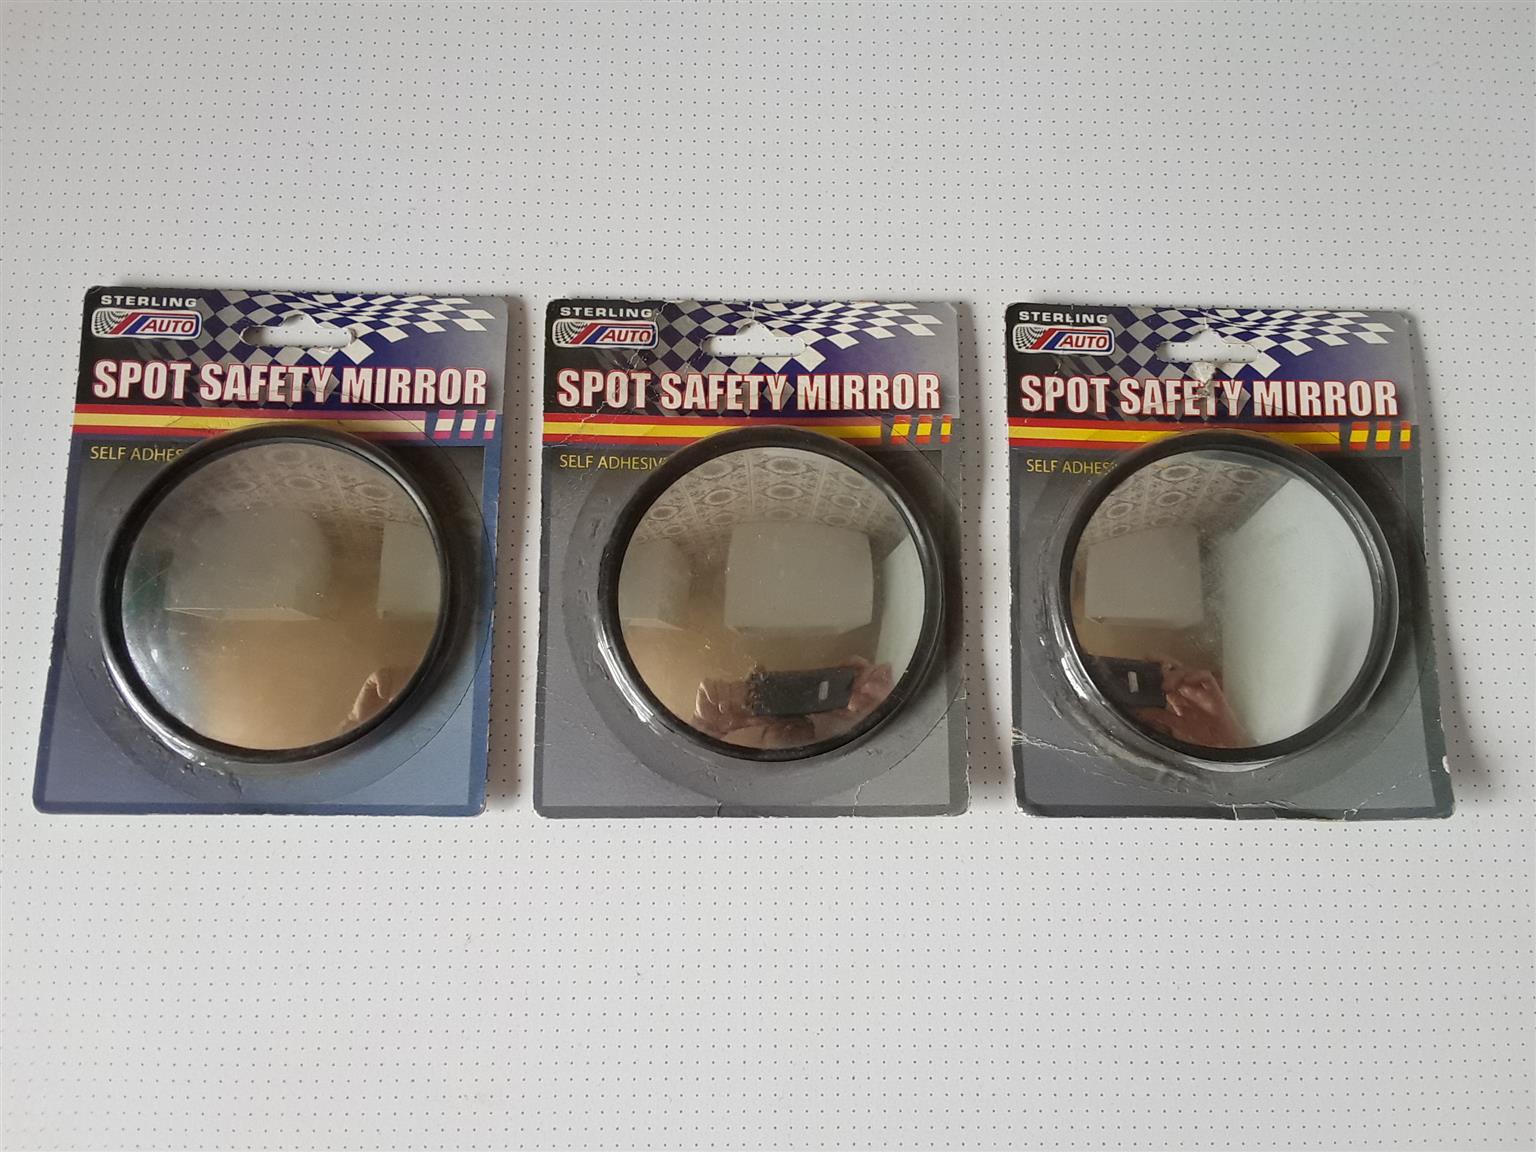 Spot Safety Mirror. Self Adhesive. Multipurpose. Brand new in a box. Three to choose from.